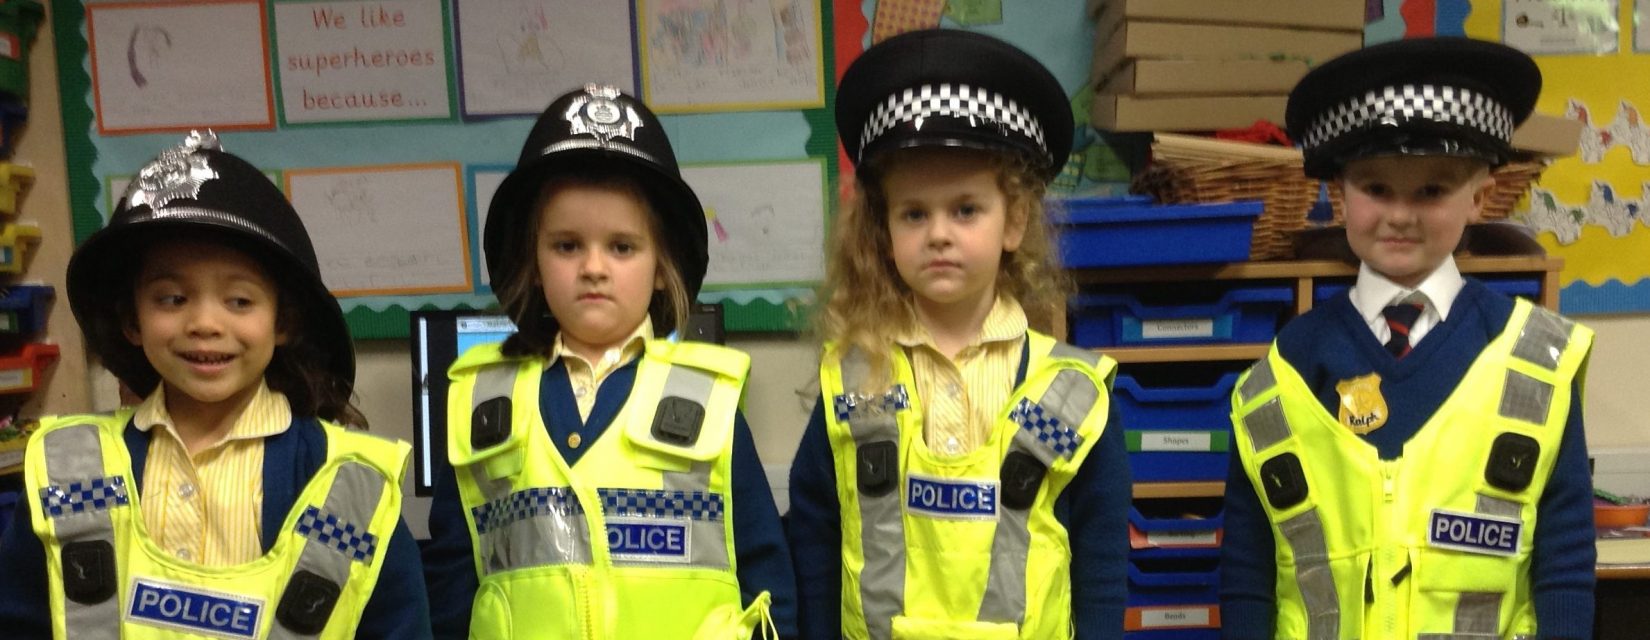 children dressed as police officers